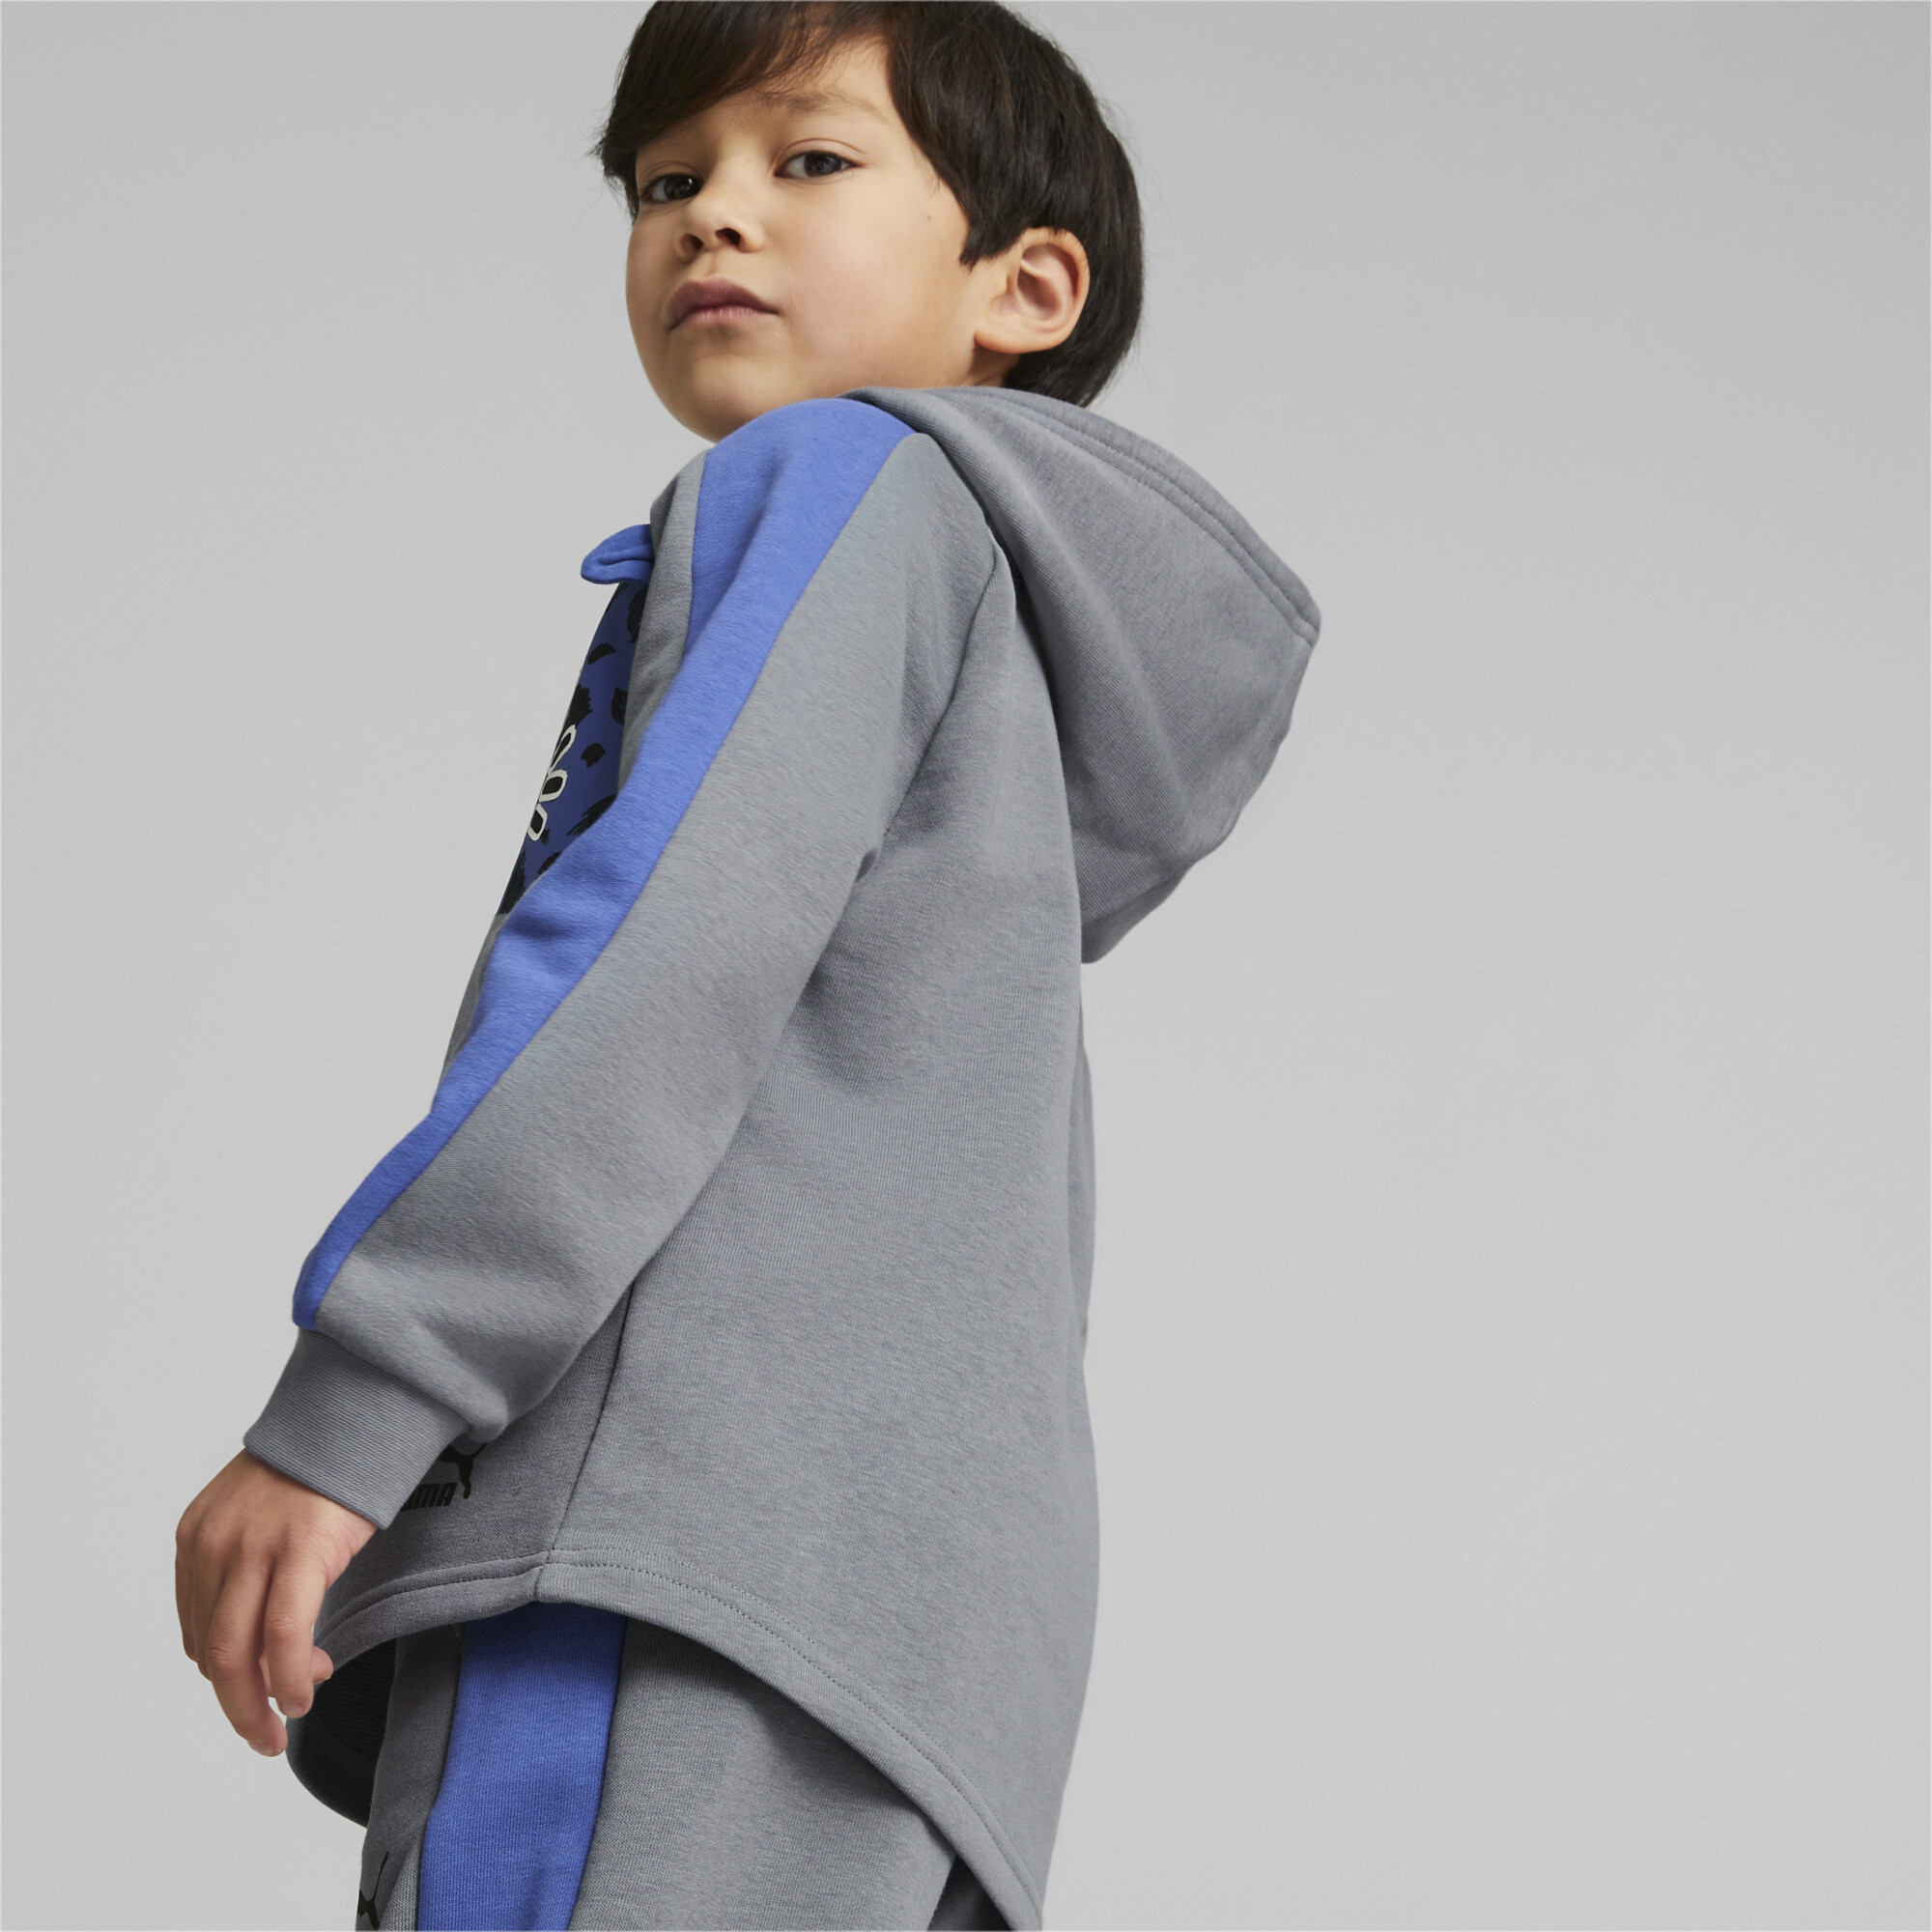 PUMA MATES T7 Hoodie Kids In Gray, Size 3-4 Youth